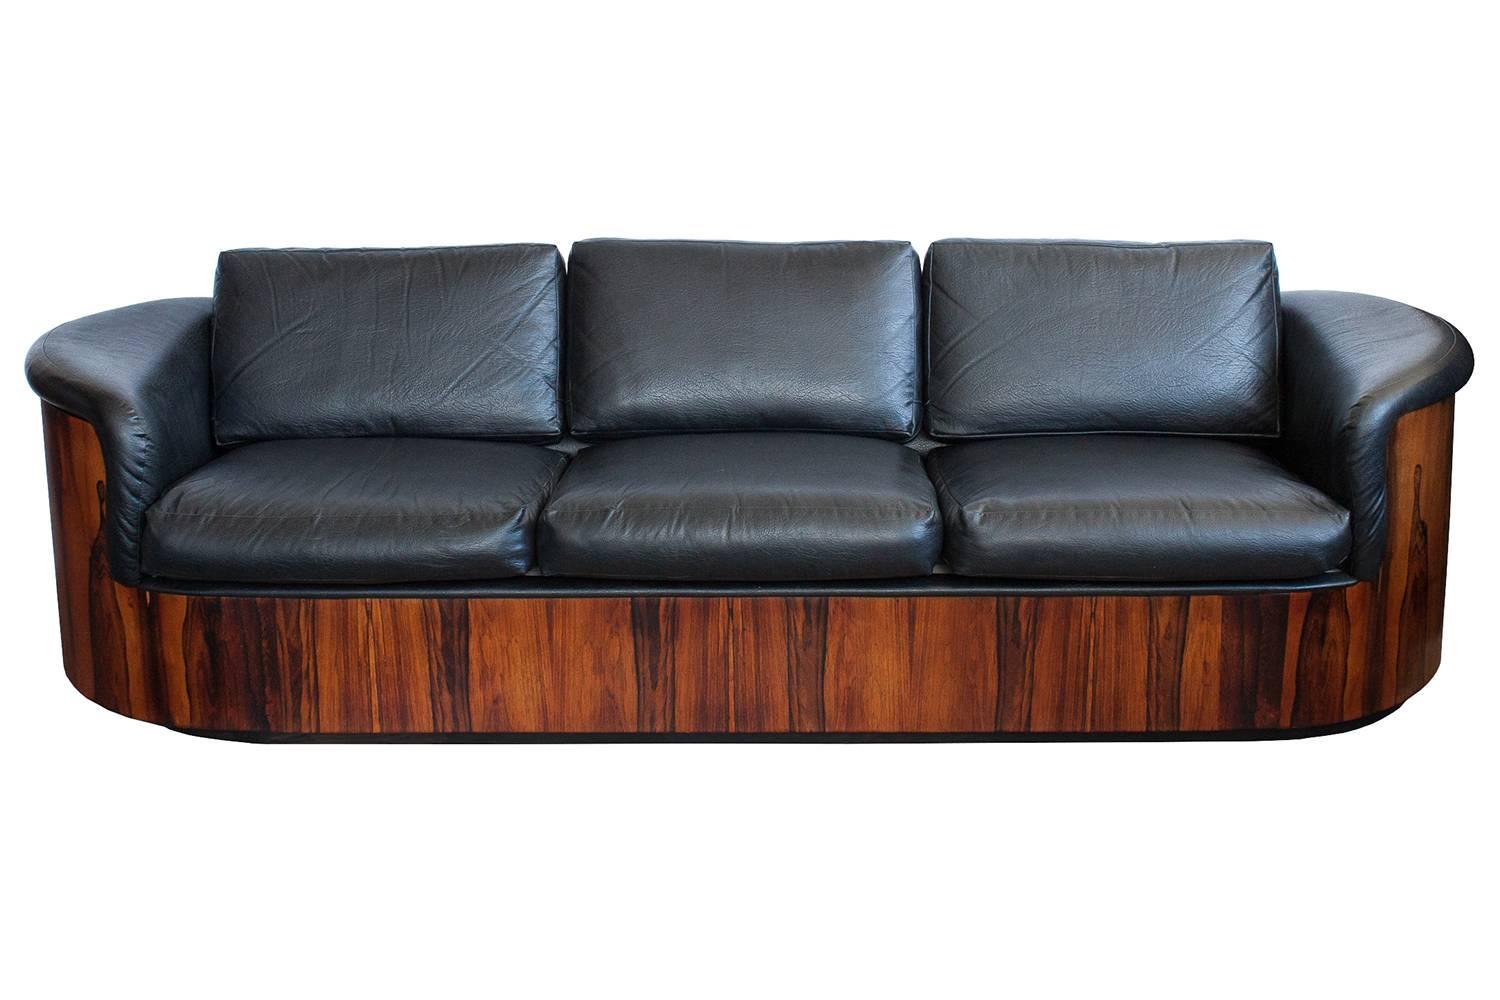 Rare rosewood sofa by Plycraft. A seldom seen design by Plycraft, one of the pioneers of moulded plywood furniture in America. Nicely figured grained rosewood and original black Naugahyde upholstery. Unique racetrack or pill shaped moulded plywood